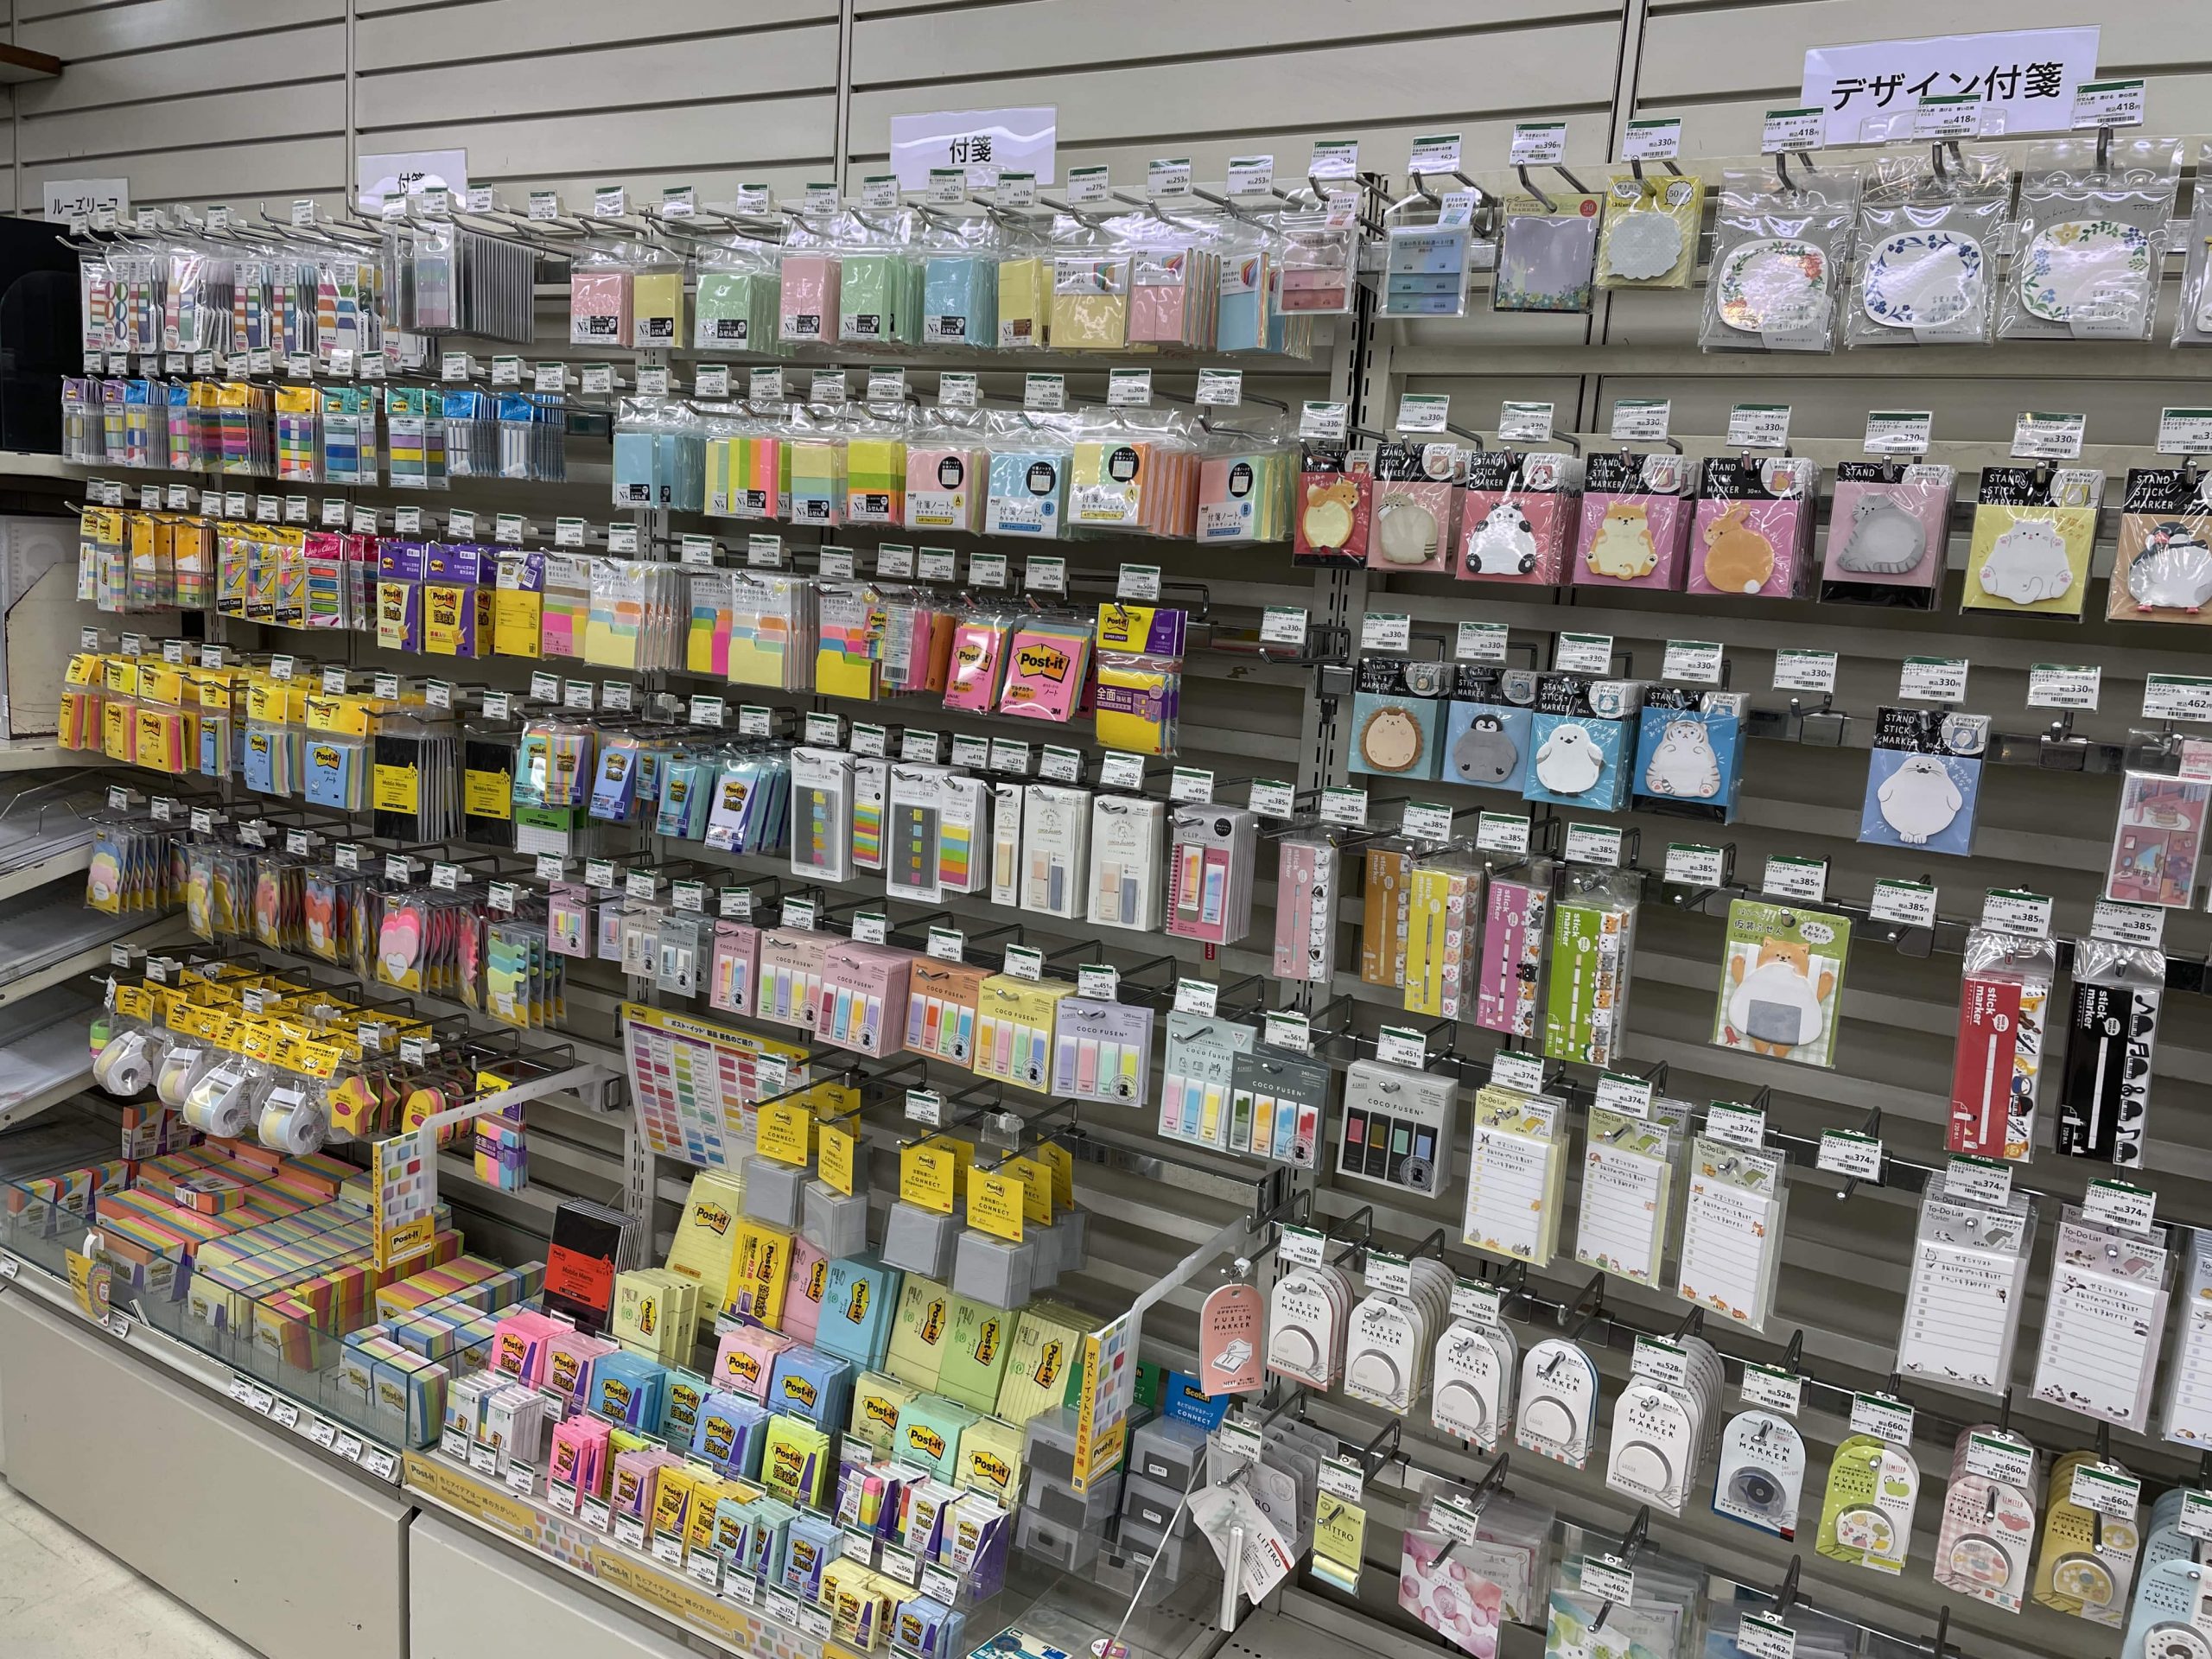 tokyo hands best stationery shops in japan sticky notes post it notes 3M japanese planner supplies store recommendations